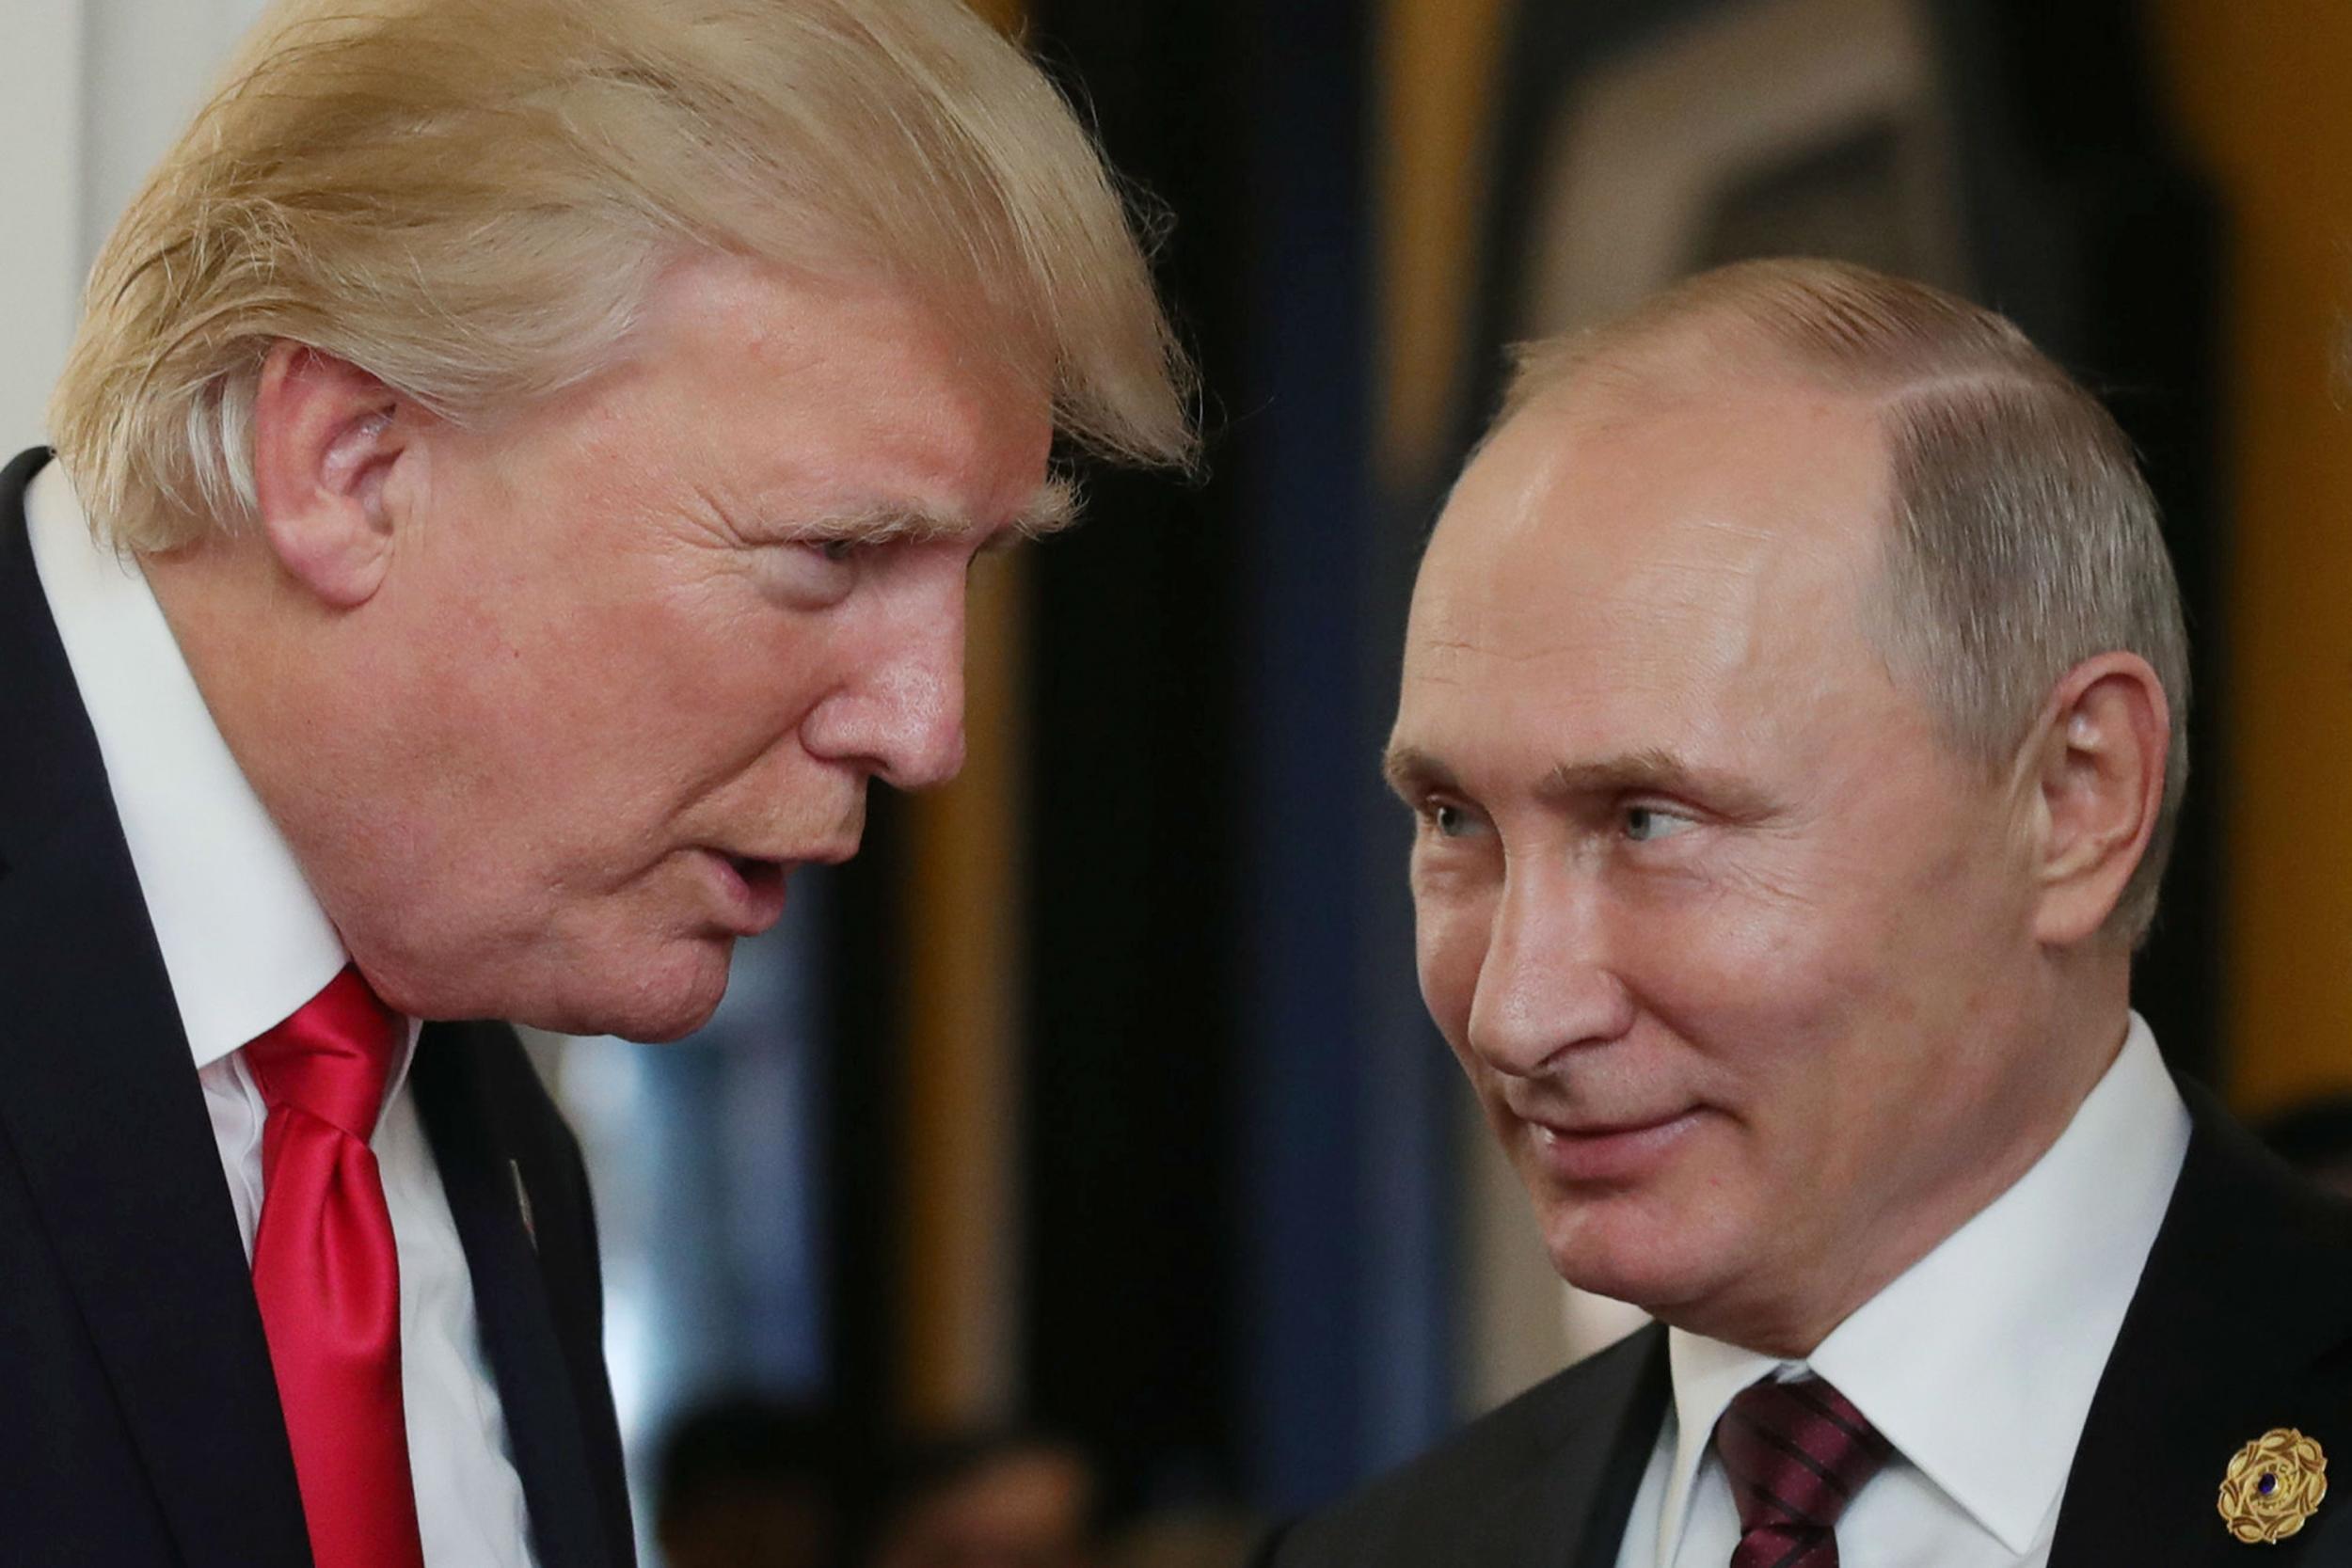 Both Mr Trump and Vladimir Putin have denied that Russia interfered in the 2016 election